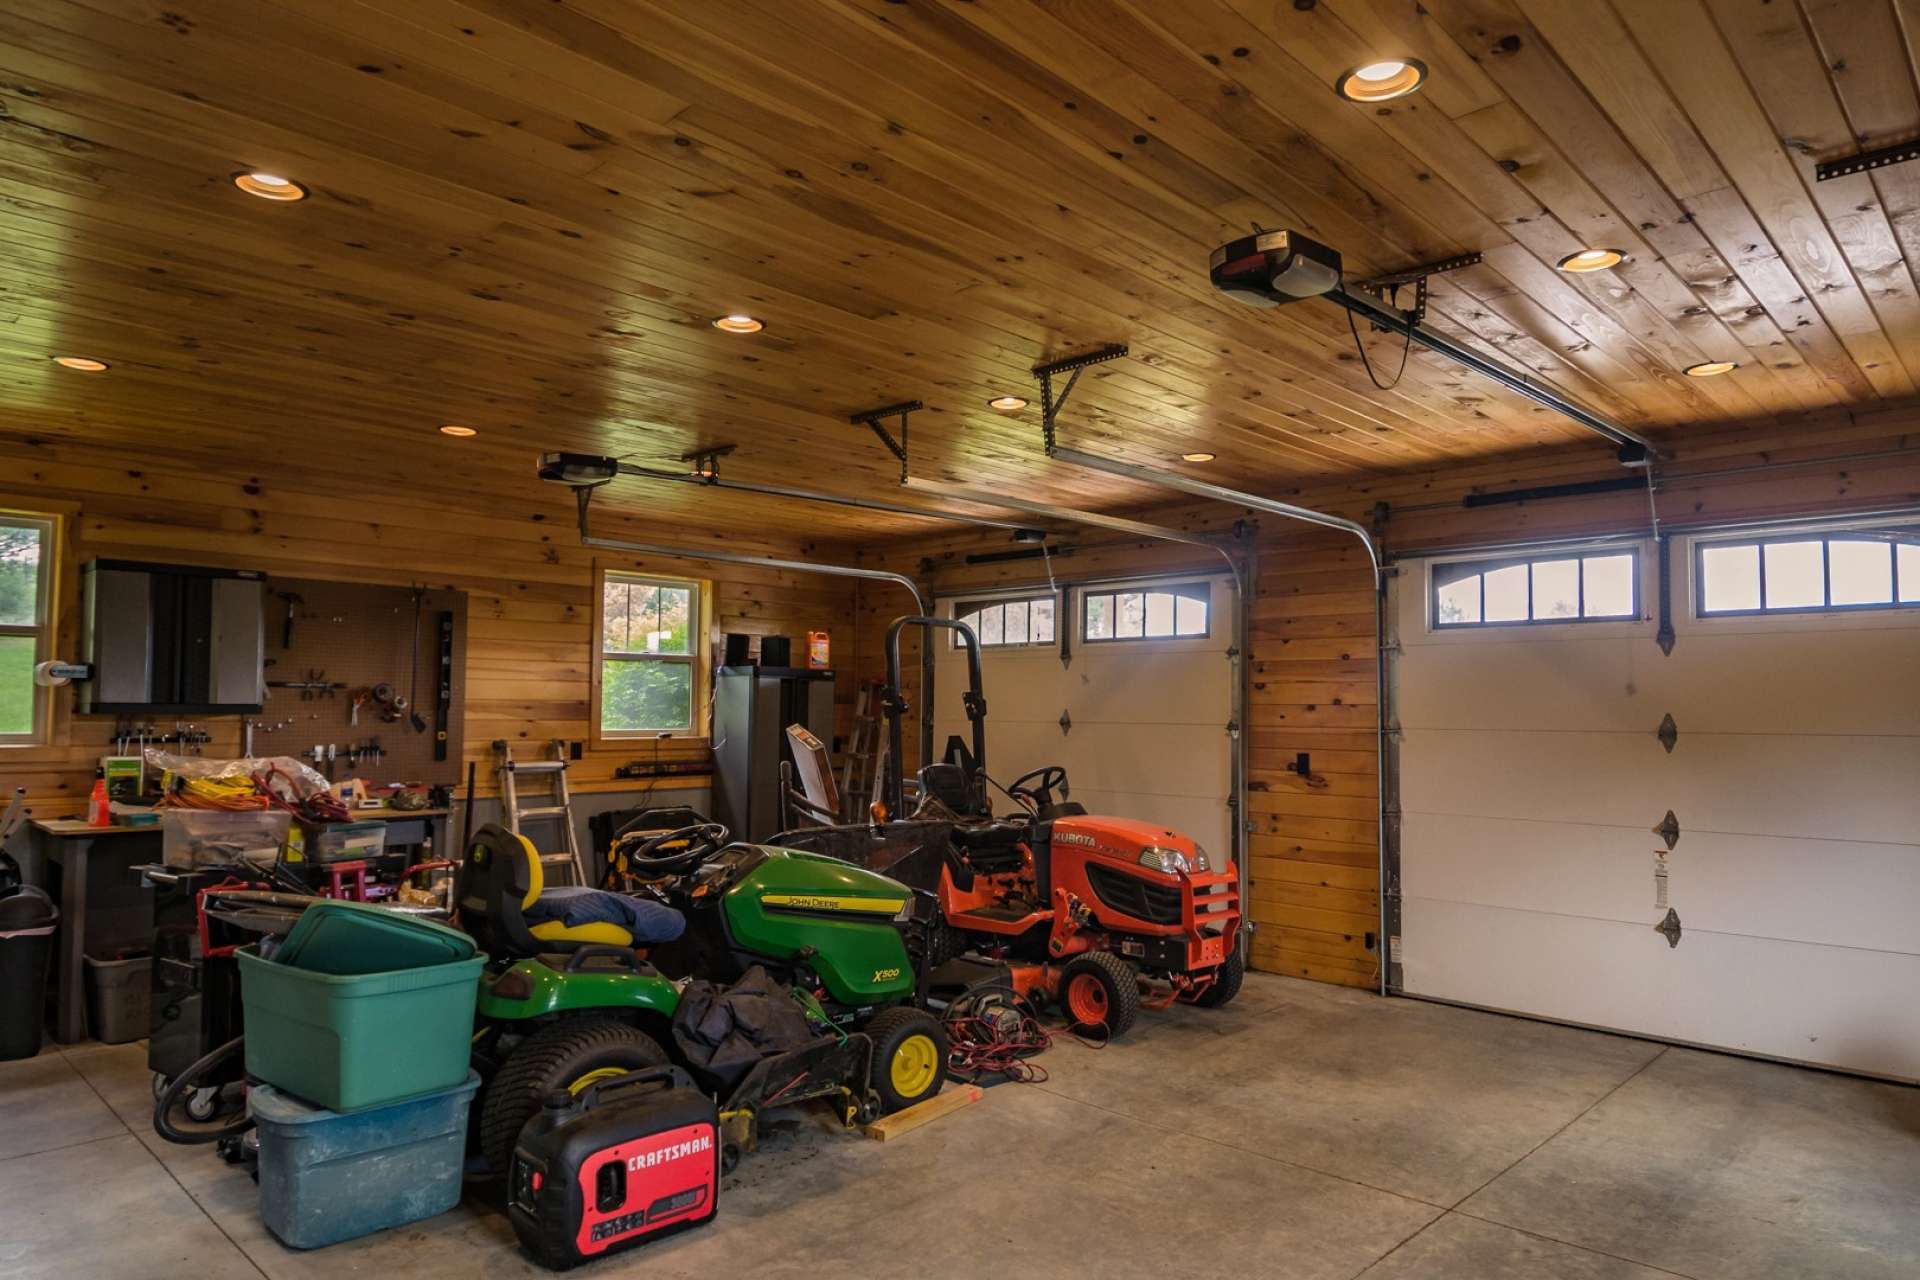 Plenty of room for additional storage for a workshop, or  outdoor equipment.